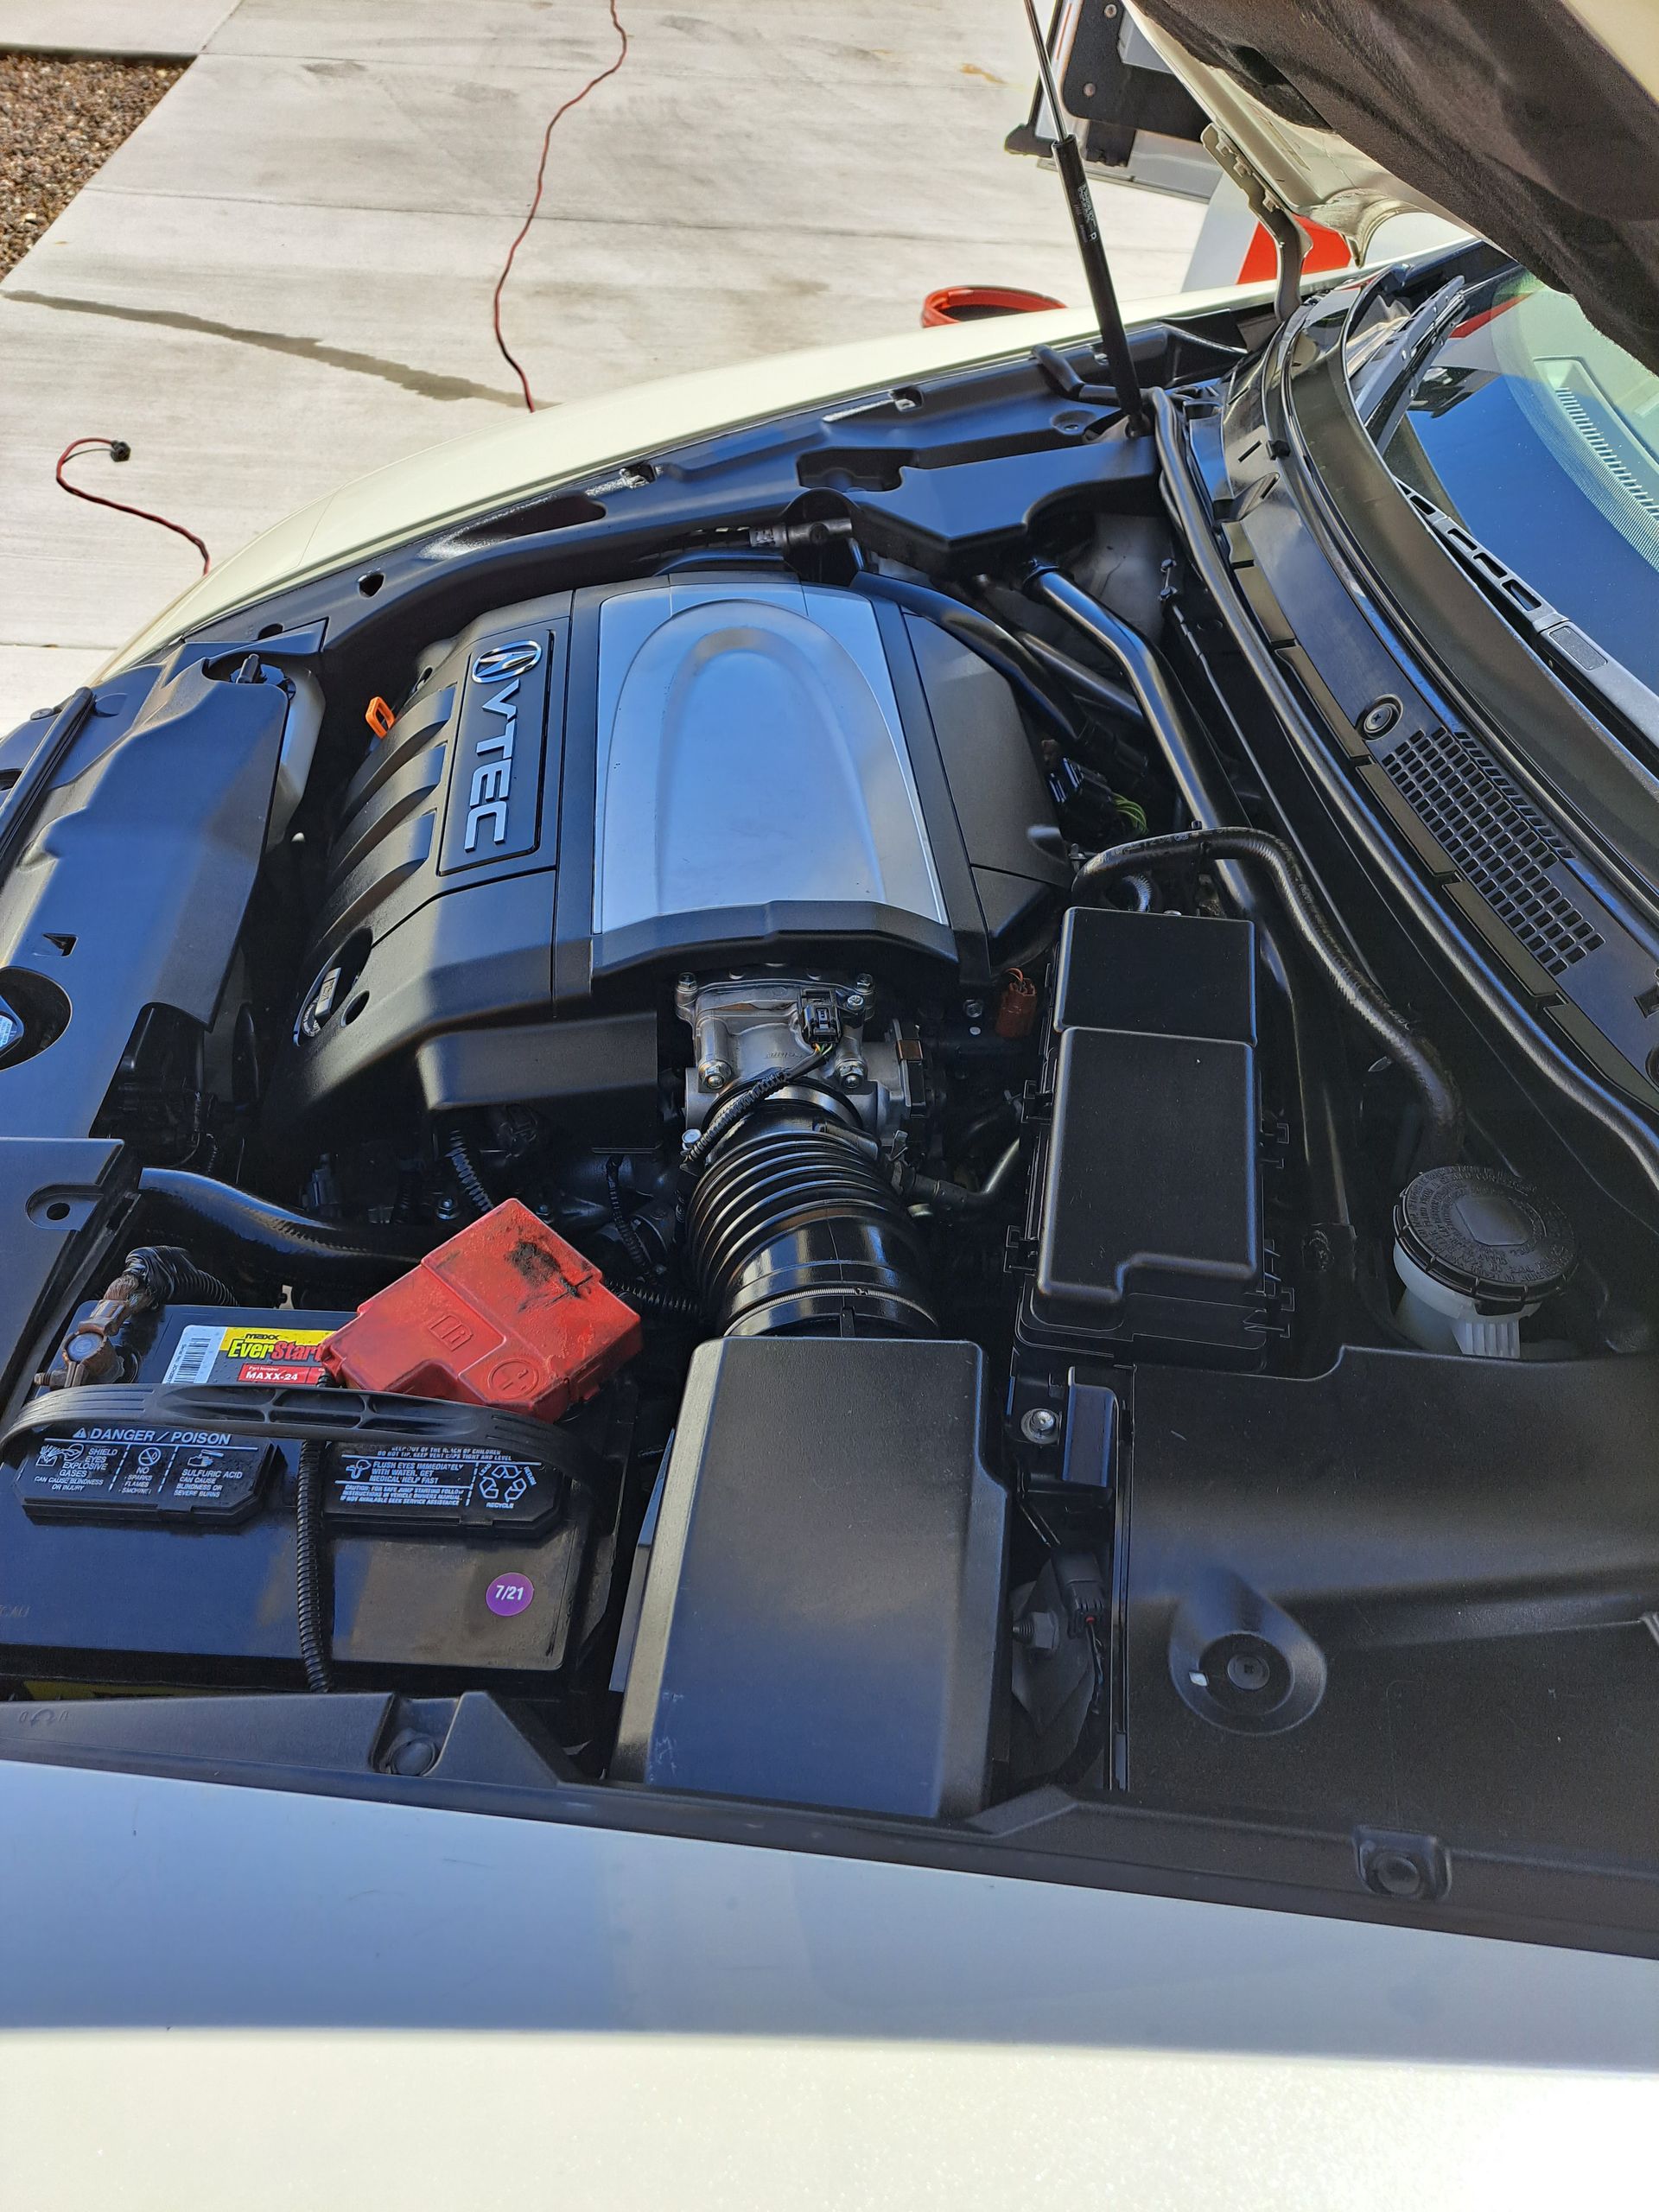 After Engine Cleaning Honda Civic In Albuquerque, NM